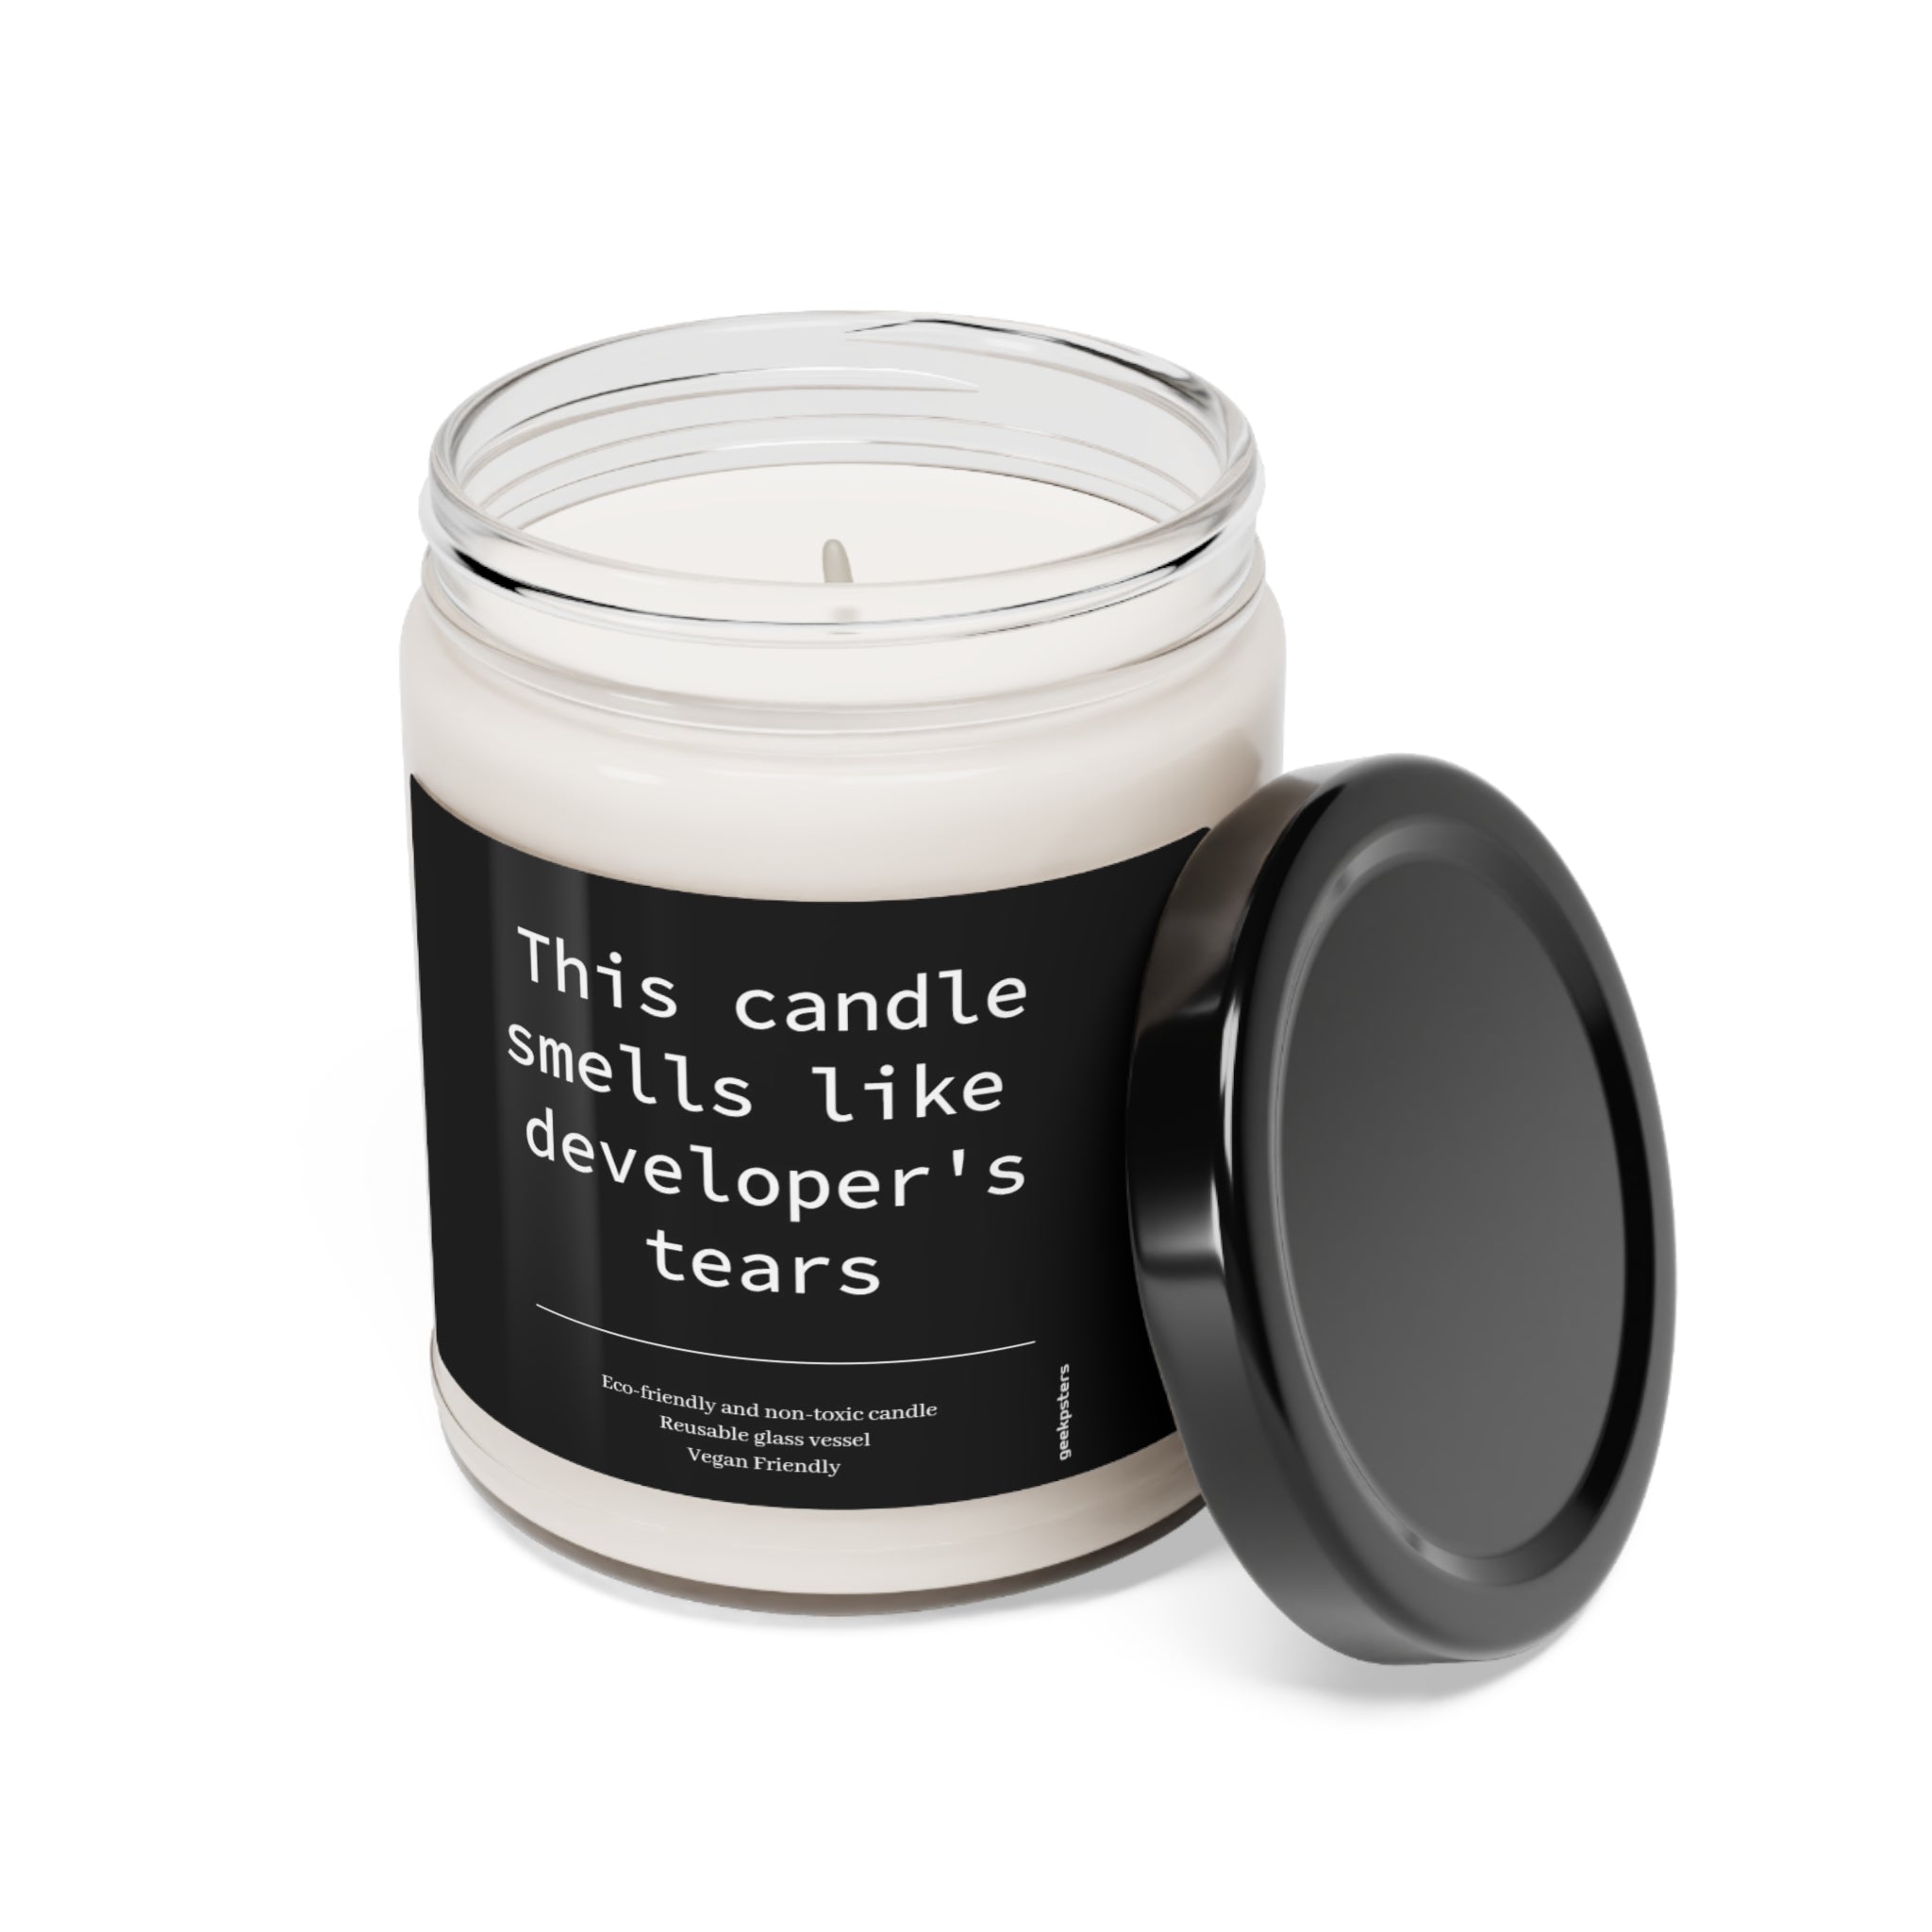 A natural soy wax blend scented This Candle Smells Like Developer's Tears candle with a humorous label that reads, "this candle smells like developer's tears," on a white background.